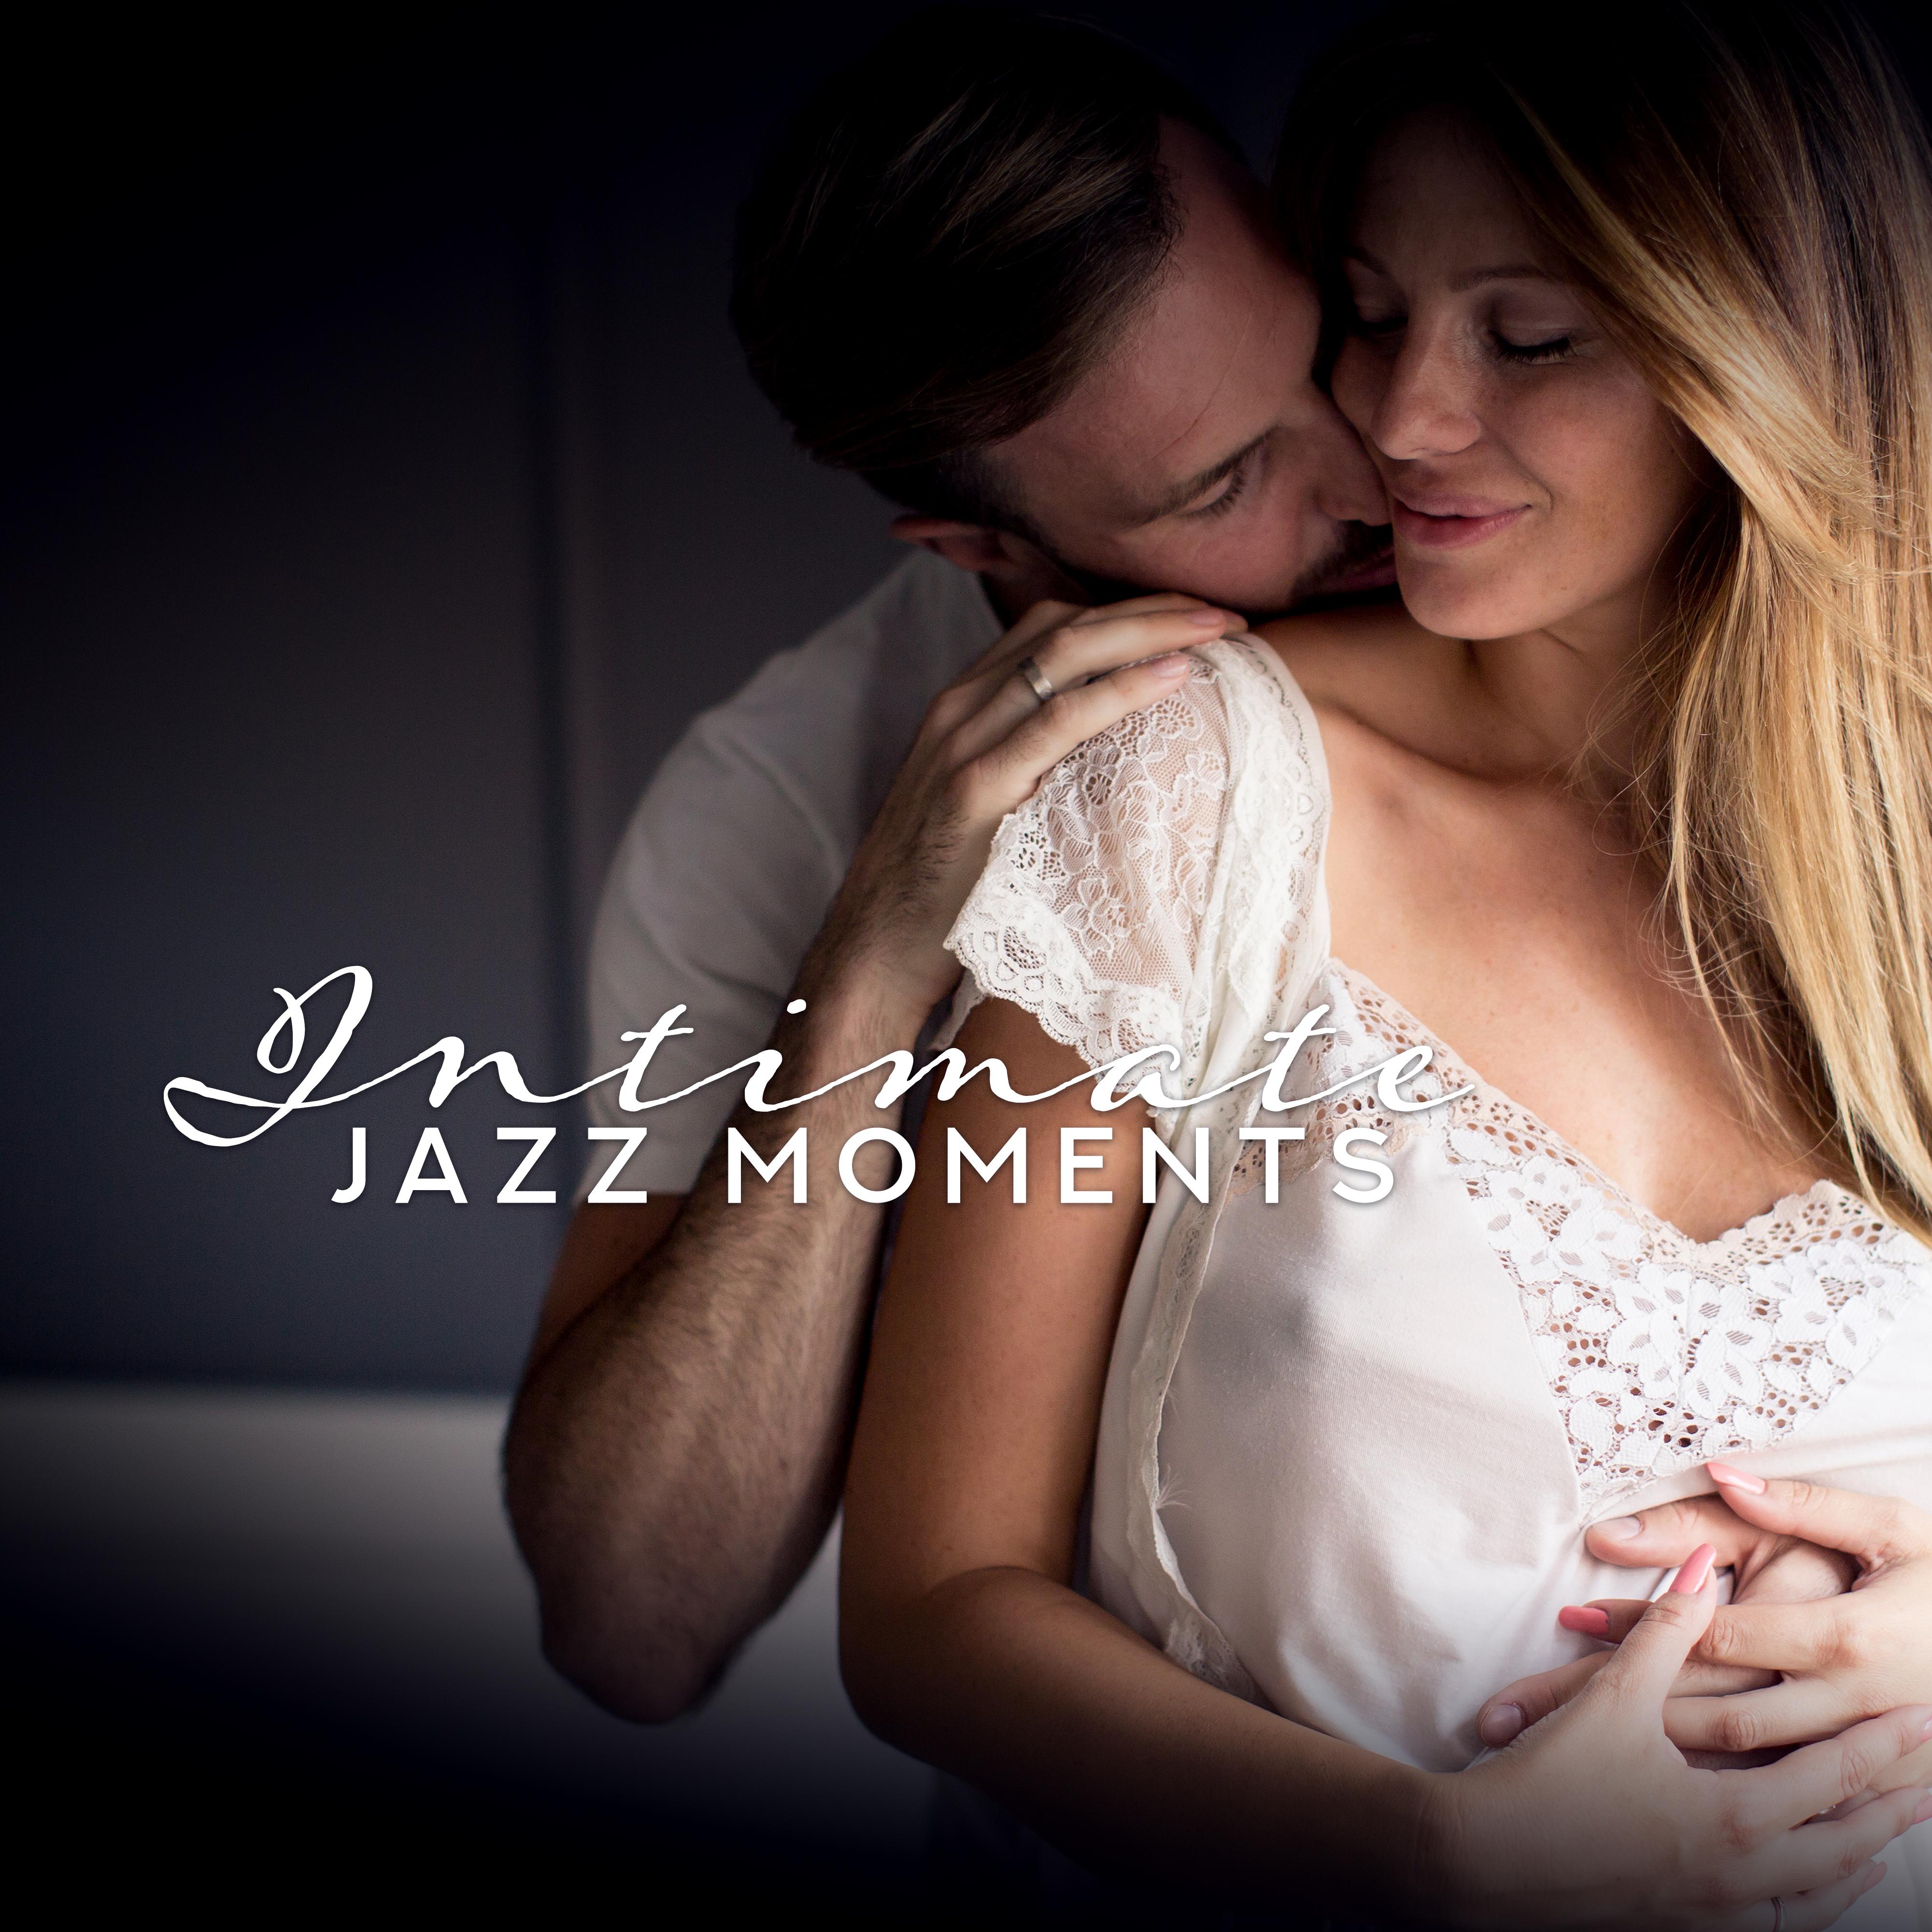 Intimate Jazz Moments: Smooth Jazz Instrumental 2019 Compilation, Music Perfect for Lovers, Soft Background for Romantic Meeting, Intimate Moments in Bedroom, **** Sounds of Piano, Saxophone & Many More